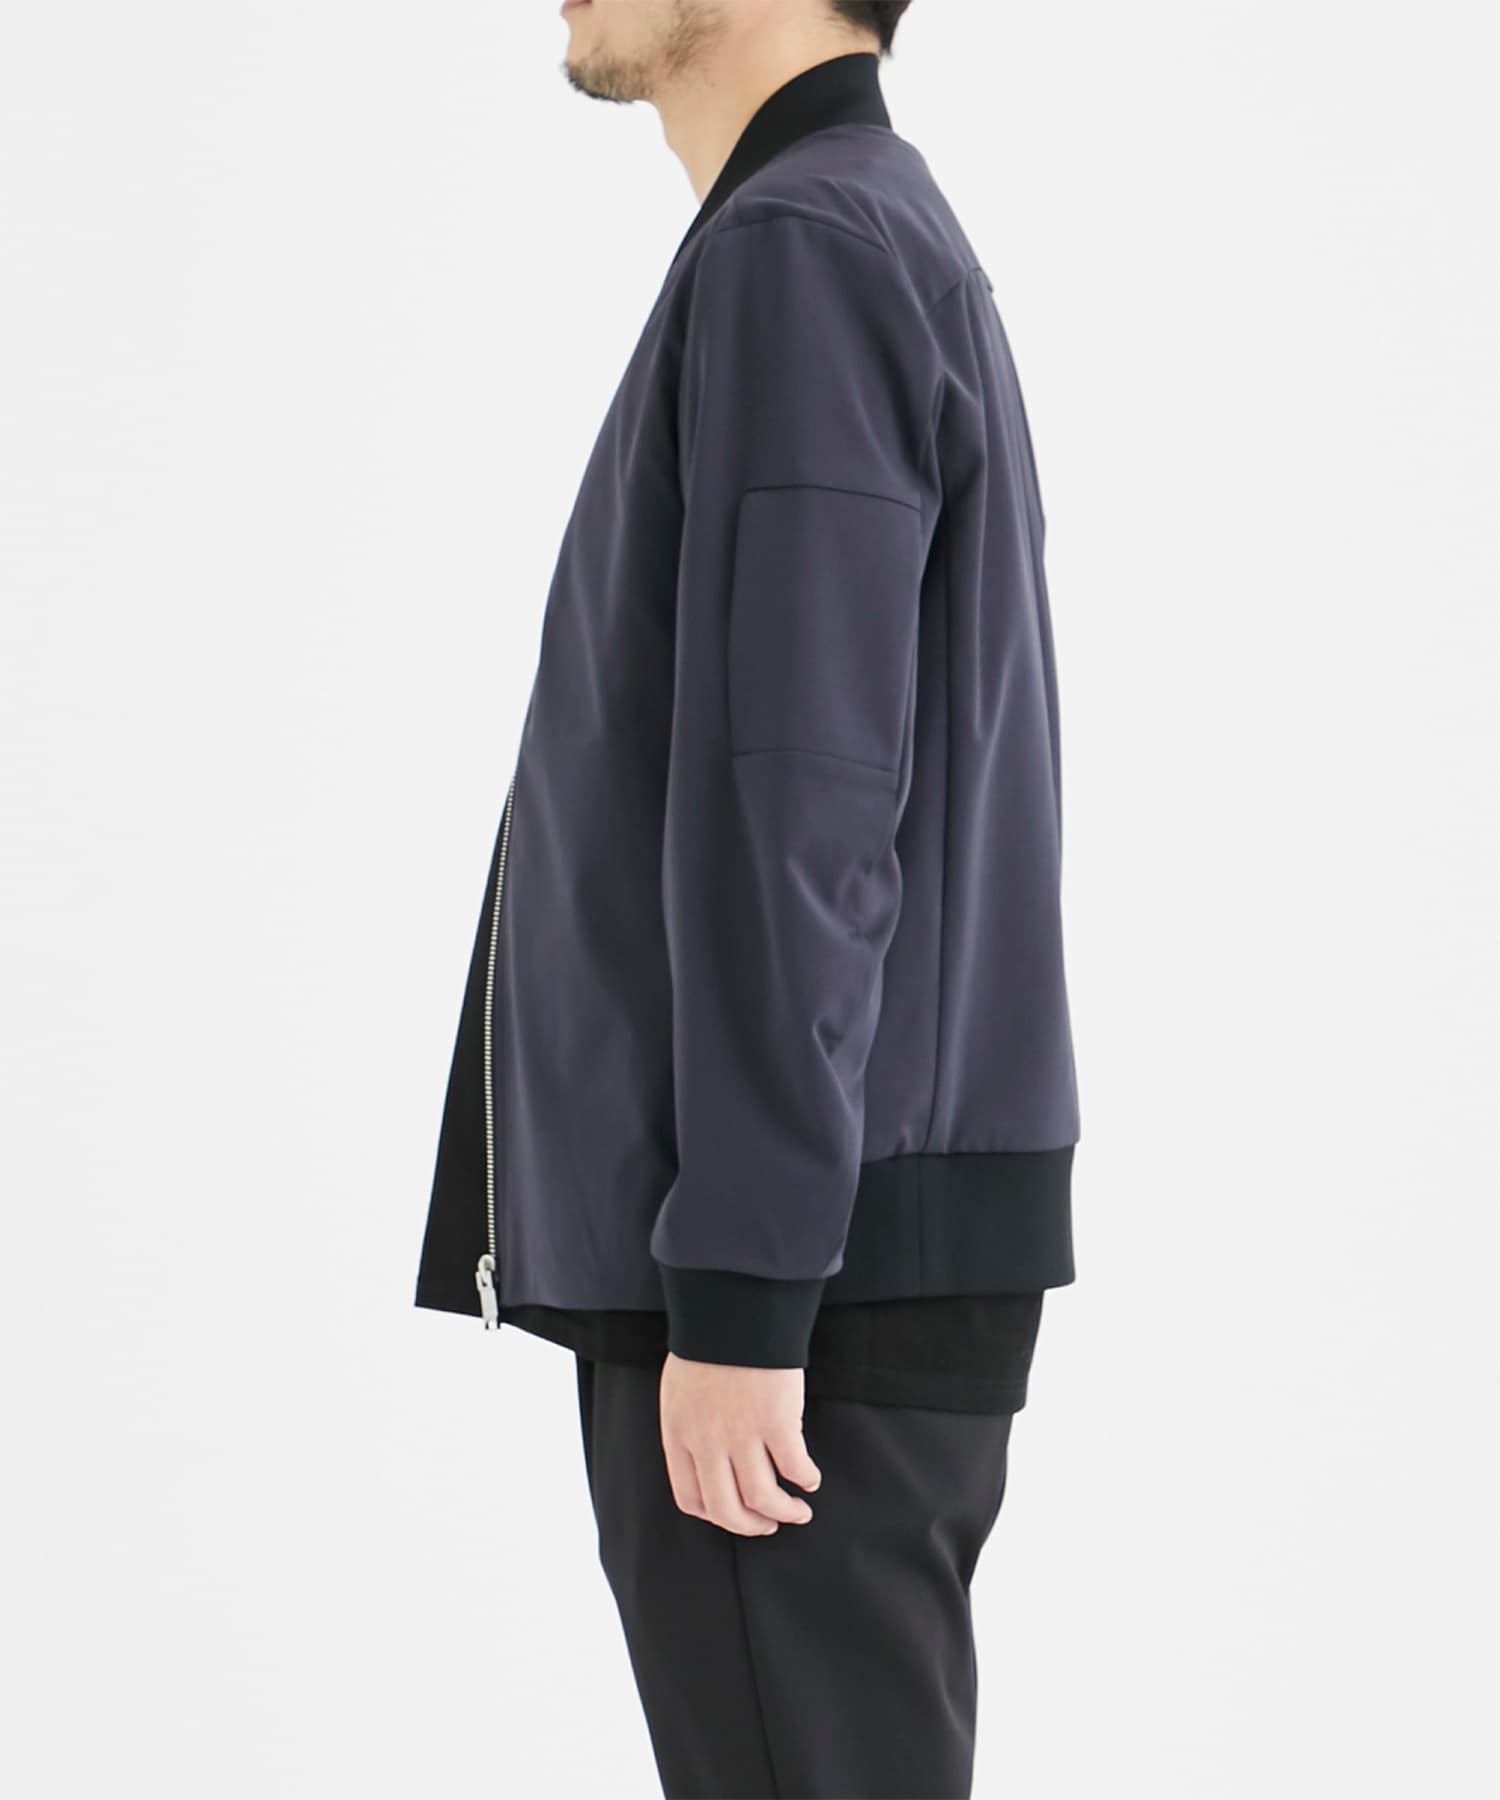 Washable High Function Jersey Blouson THE TOKYO